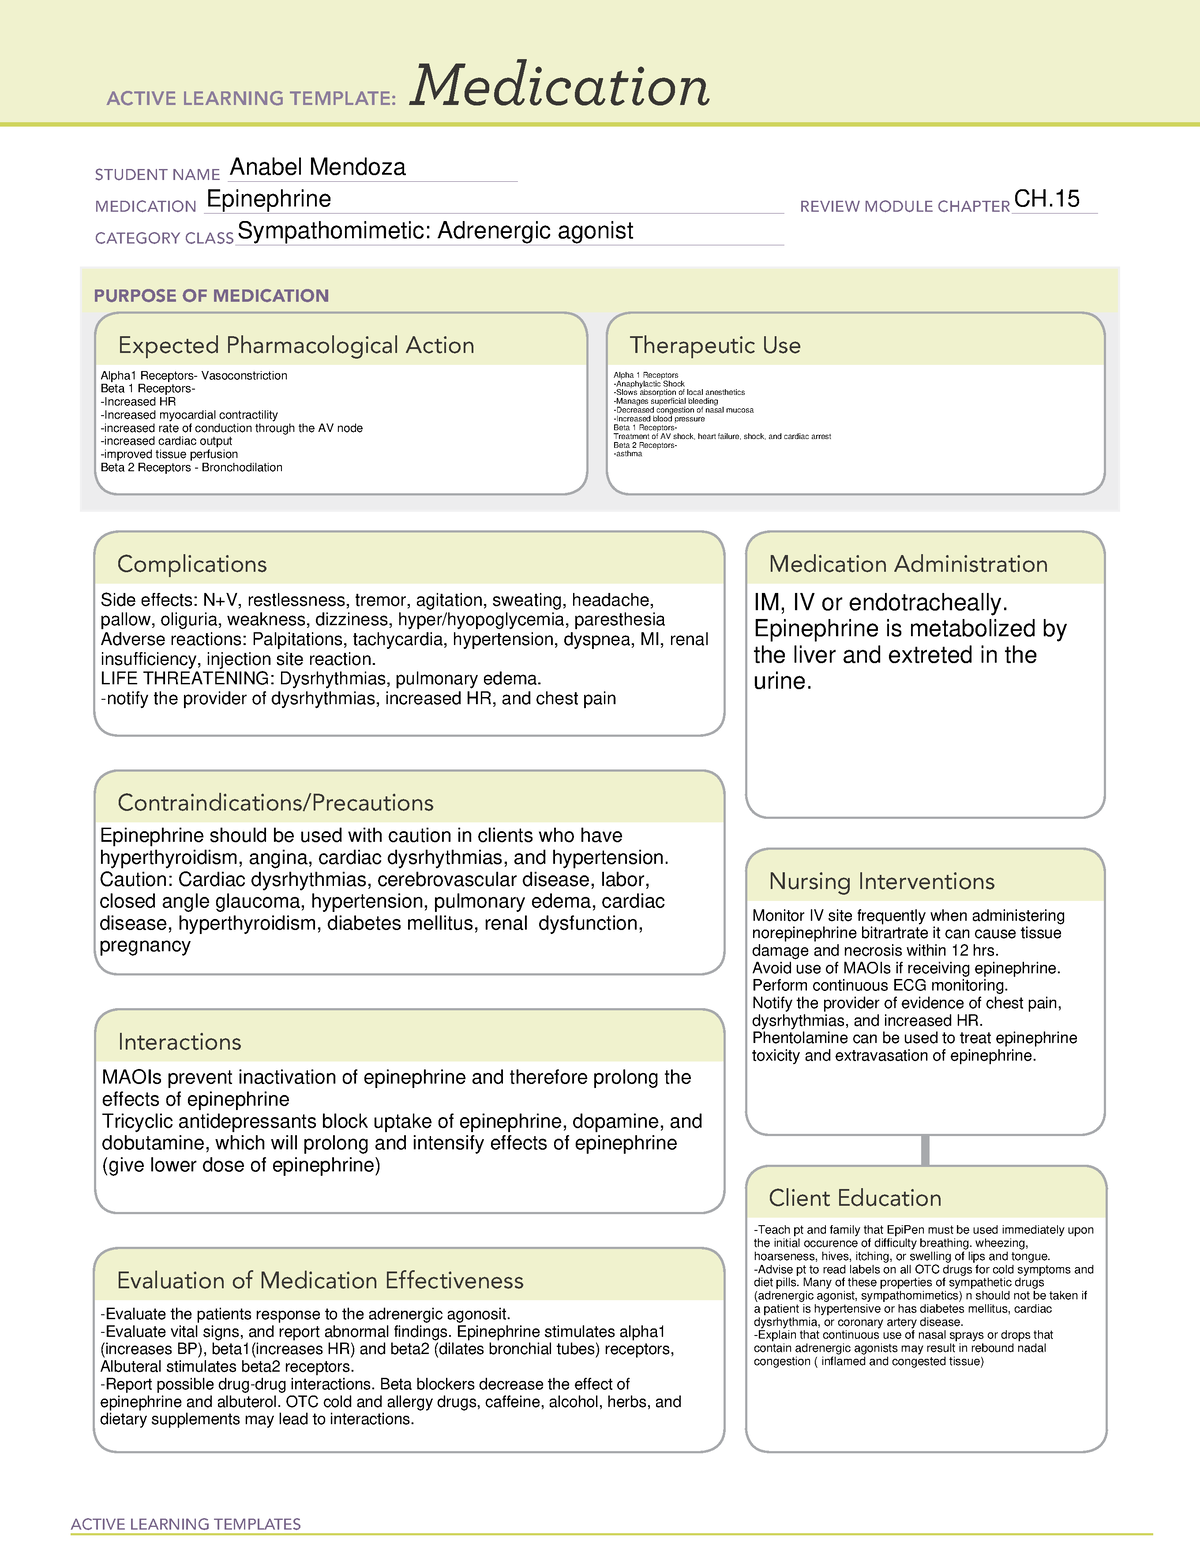 Epinephrine Medical Surgical ATI template ACTIVE LEARNING TEMPLATES